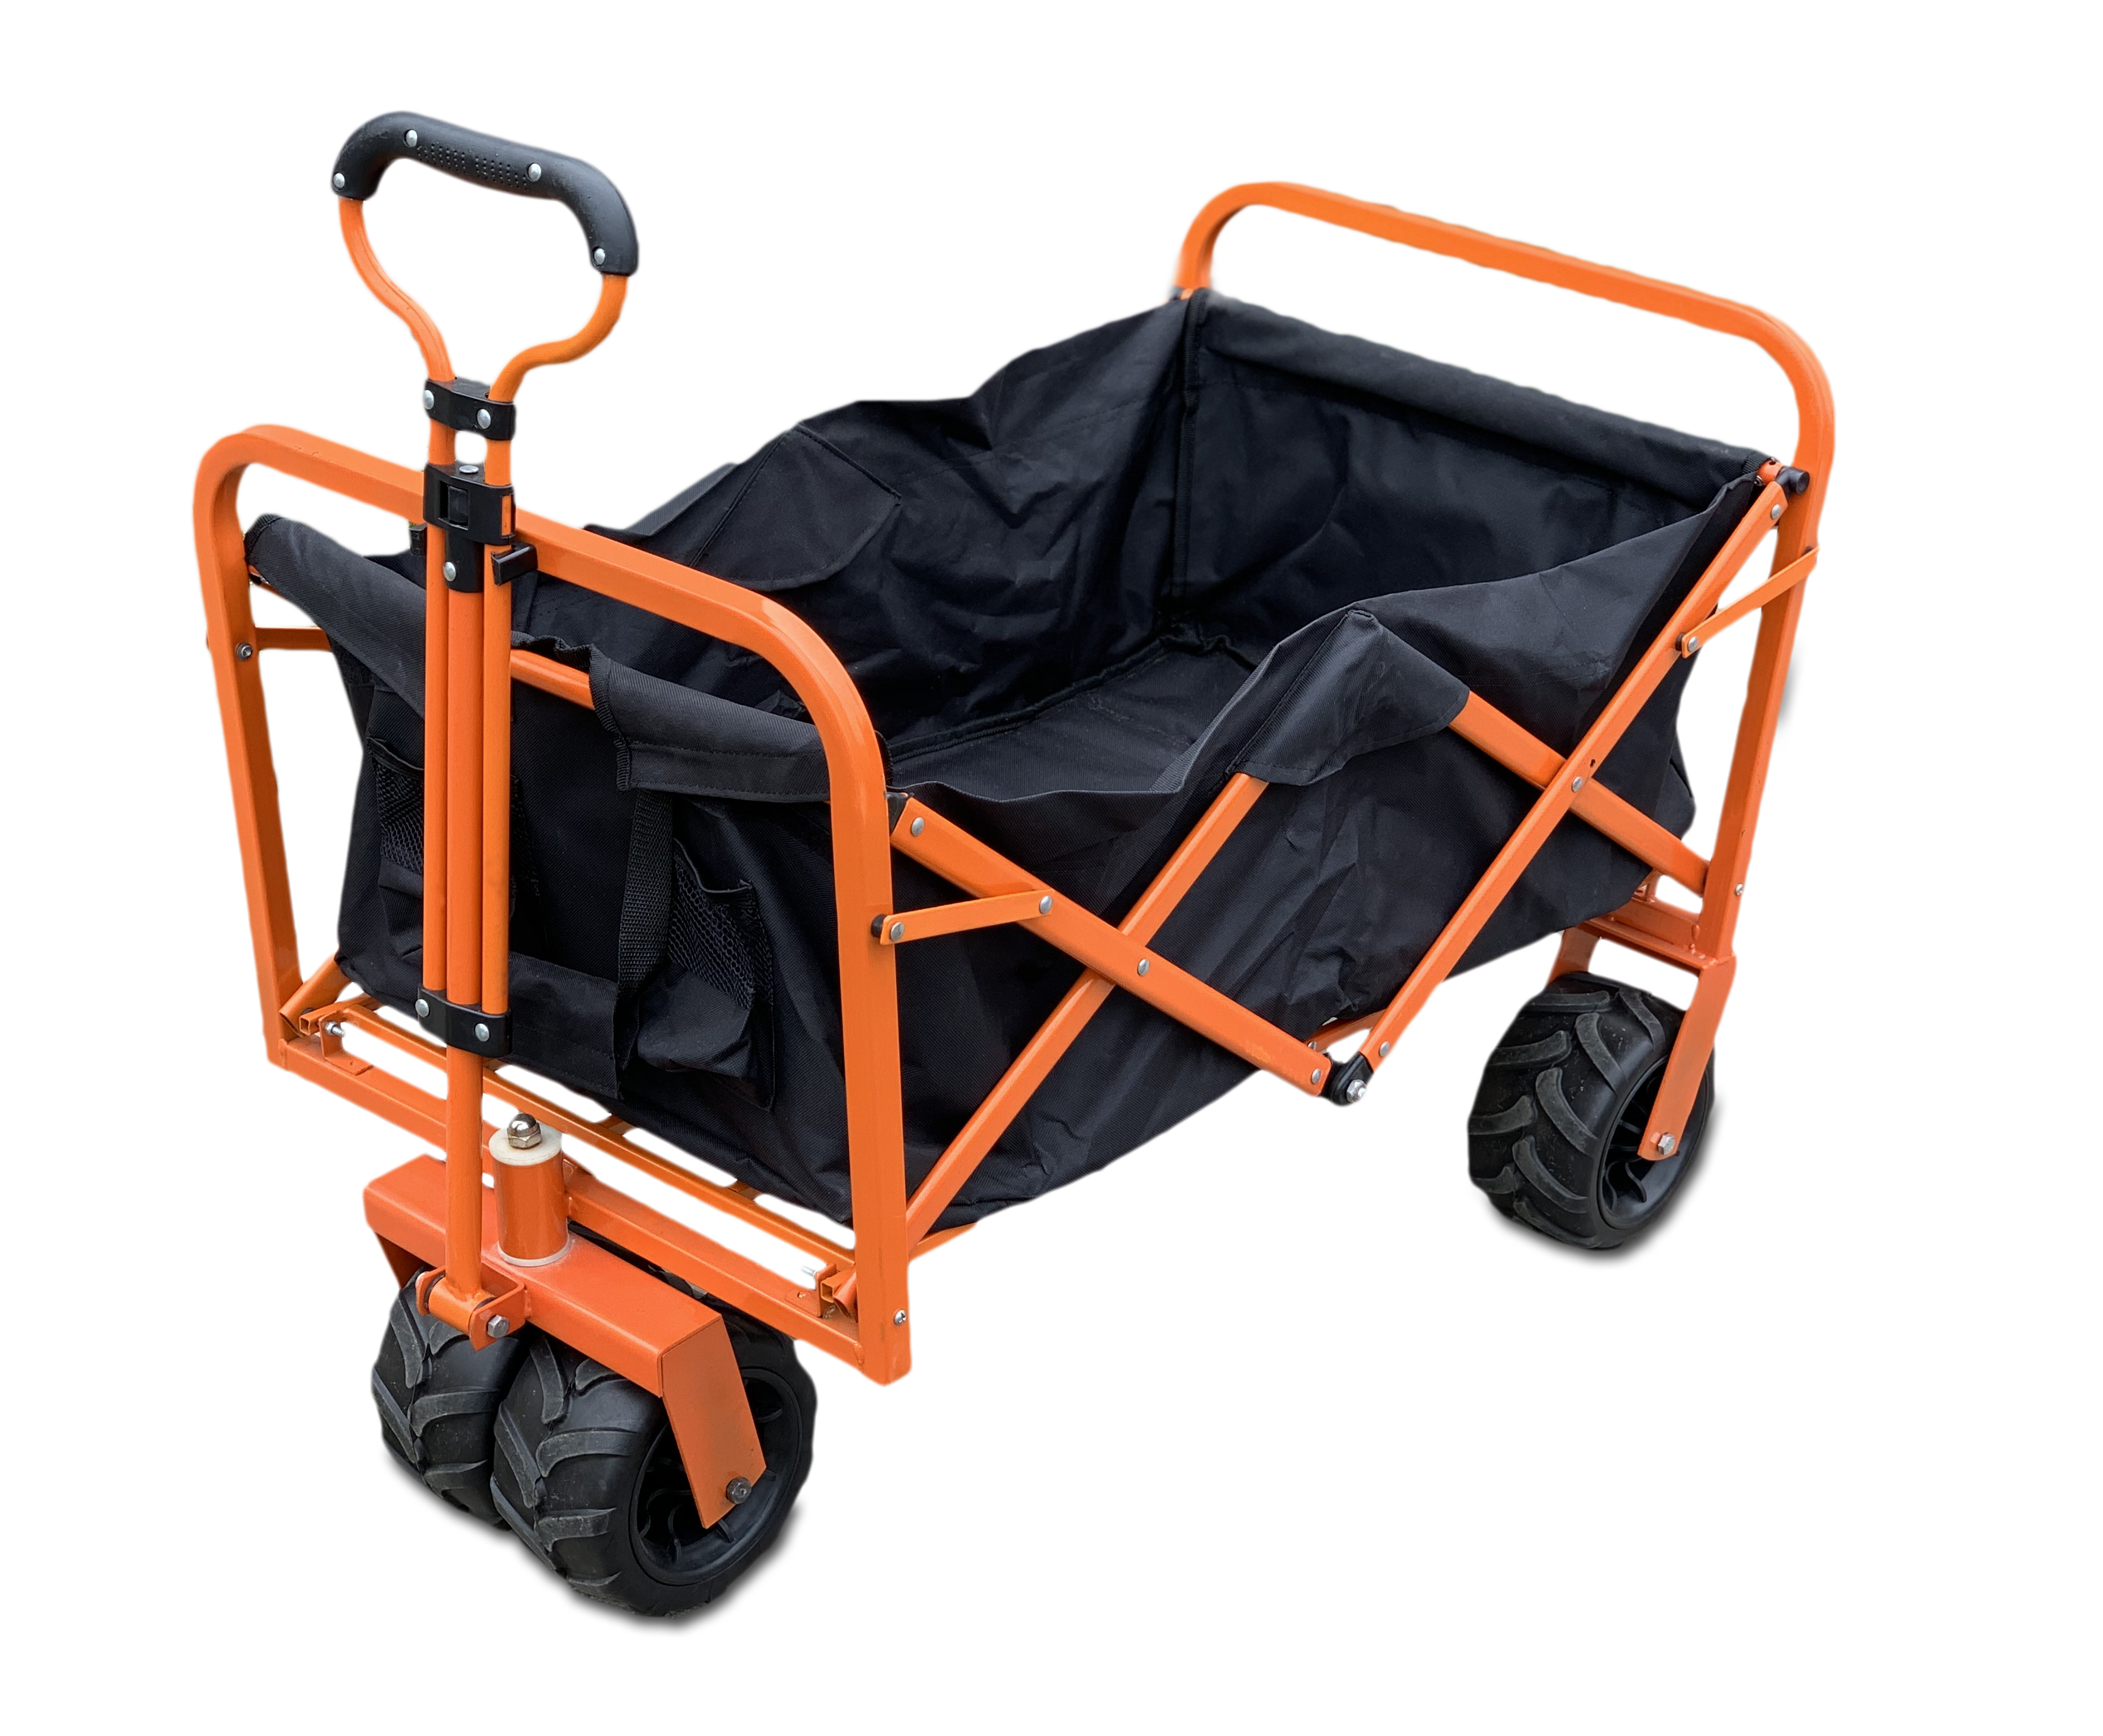 Sherpa Folding Cart Trolly Carries up 150KG SAVE £24 | Combi Marketing